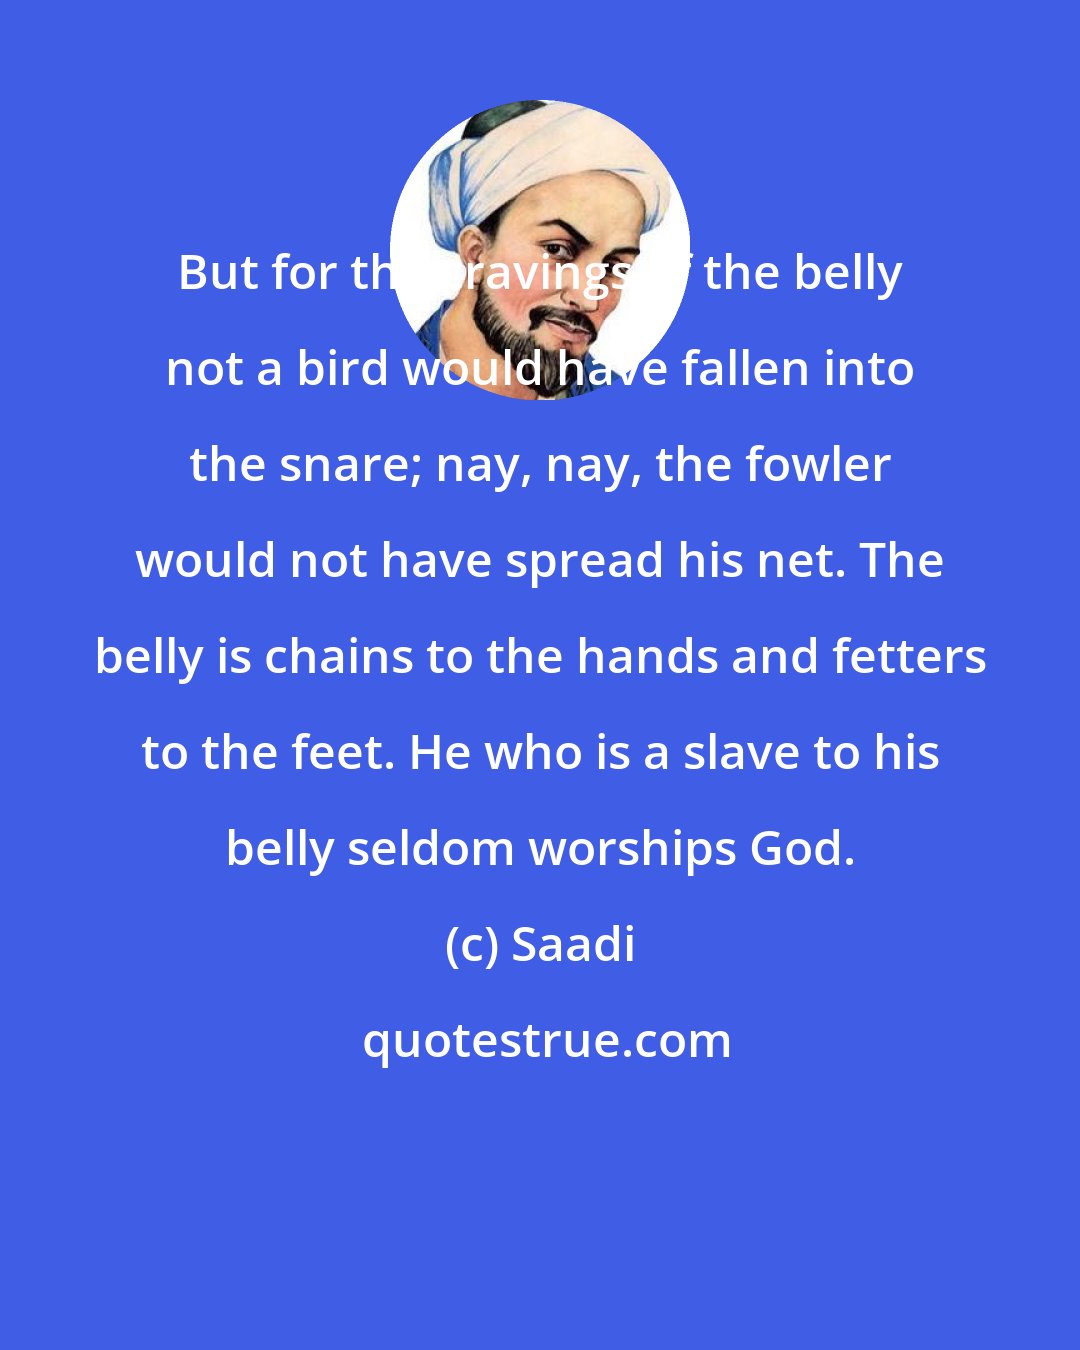 Saadi: But for the cravings of the belly not a bird would have fallen into the snare; nay, nay, the fowler would not have spread his net. The belly is chains to the hands and fetters to the feet. He who is a slave to his belly seldom worships God.